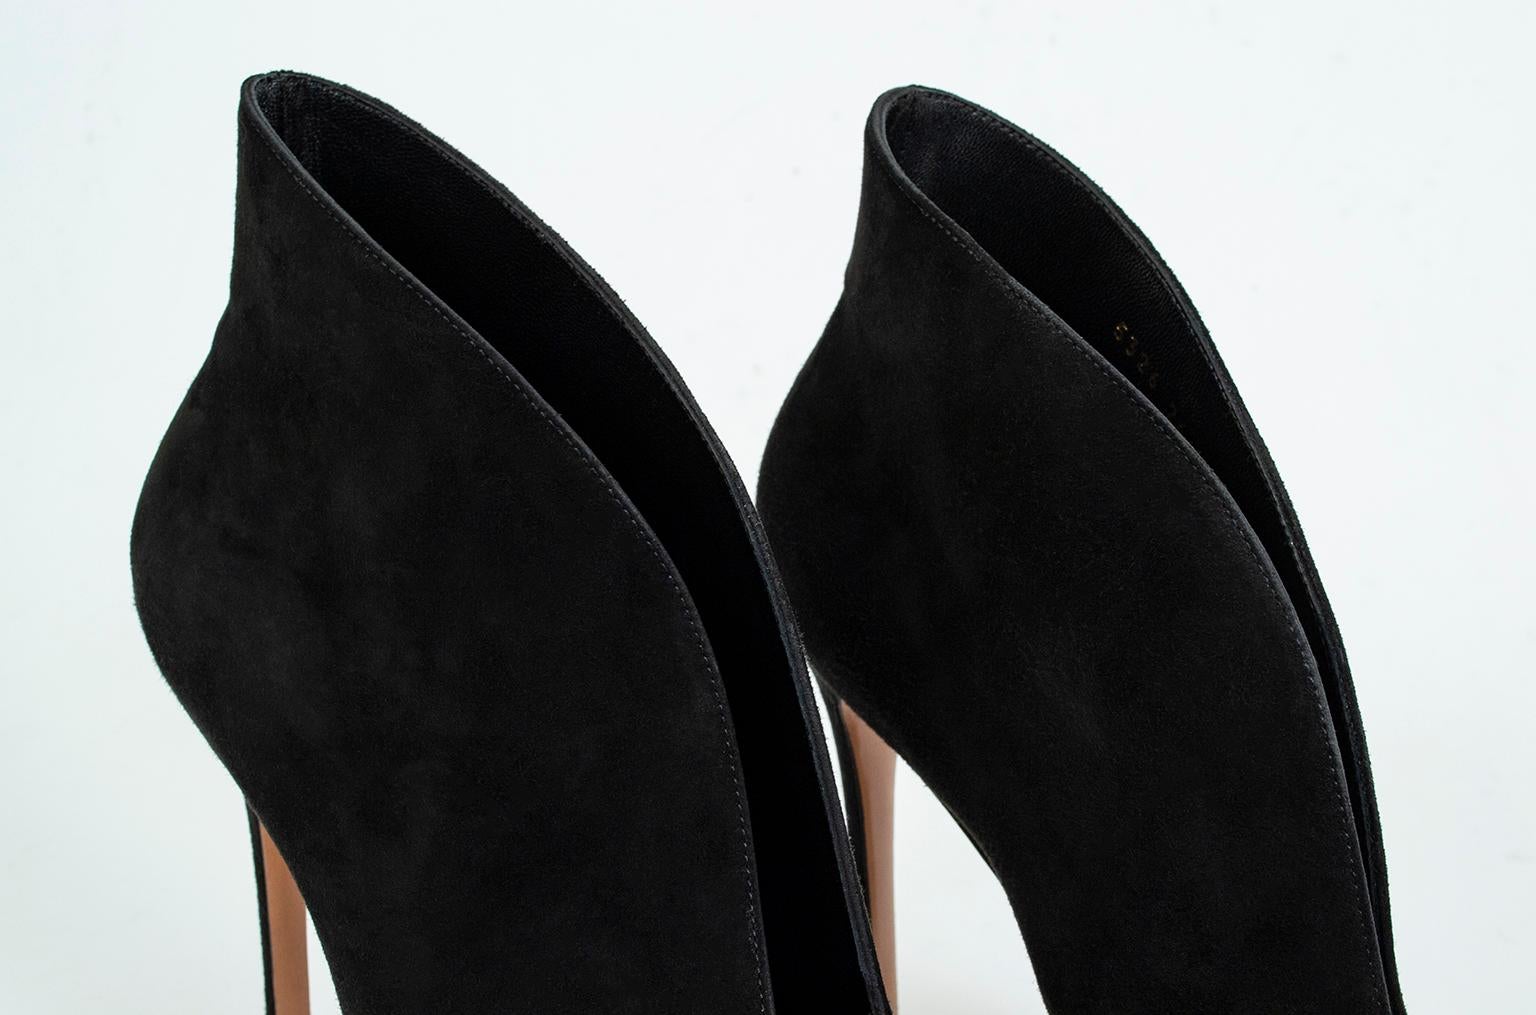 Gianvito Rossi Black Suede Collared Décolleté Peep Toe Bootie – It 39, 2012 In Good Condition For Sale In Tucson, AZ